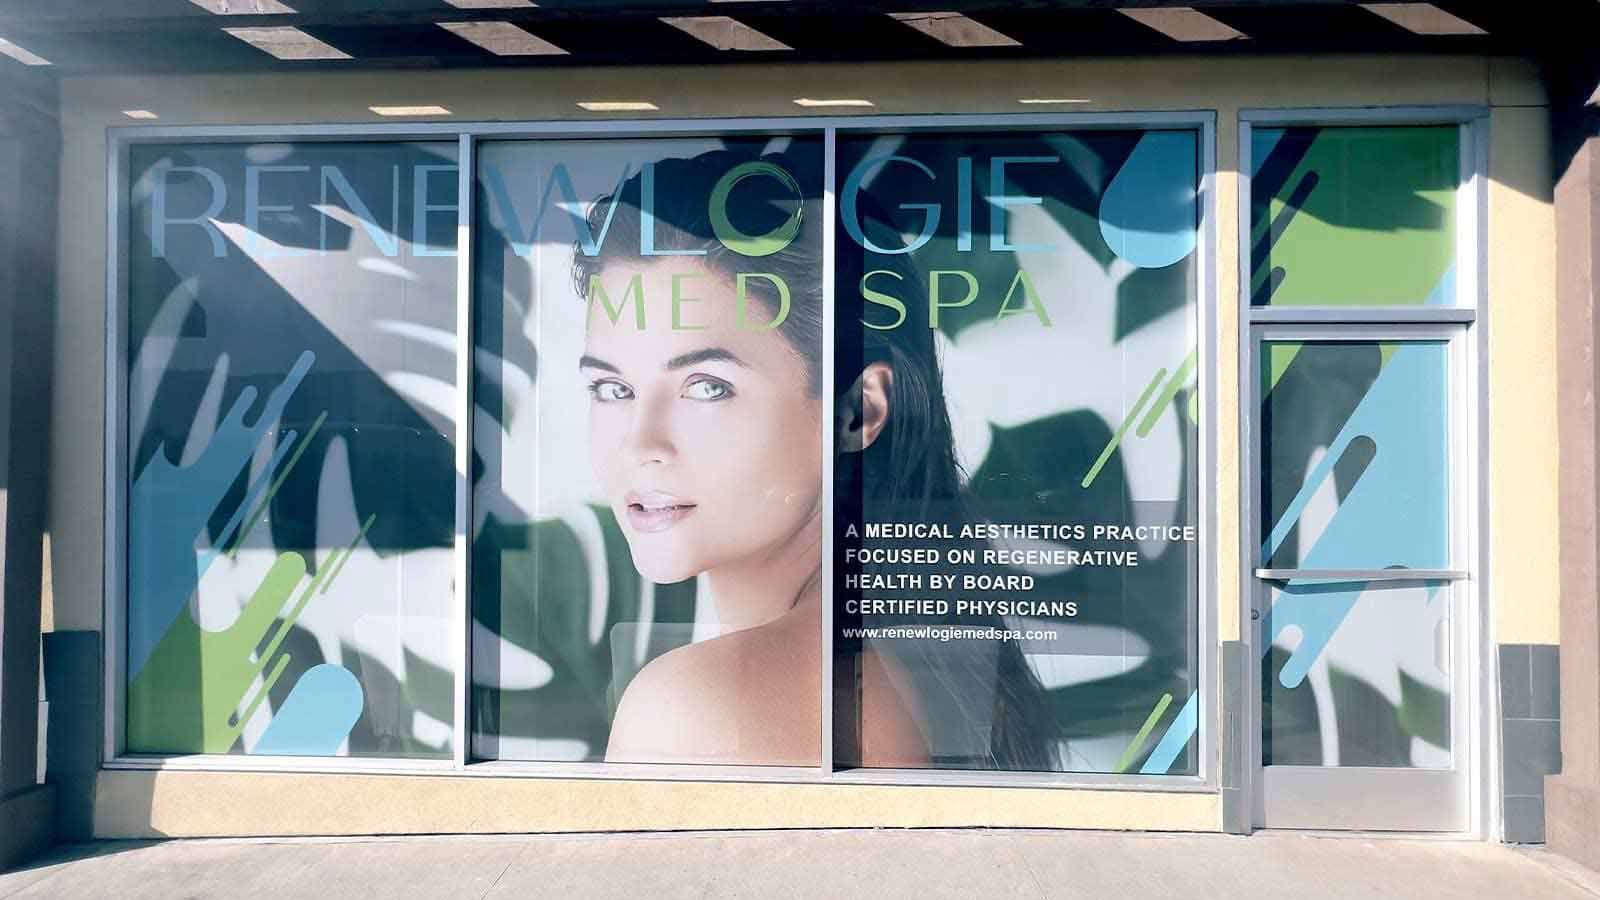 Renewlogie Med Spa window decals for the storefront